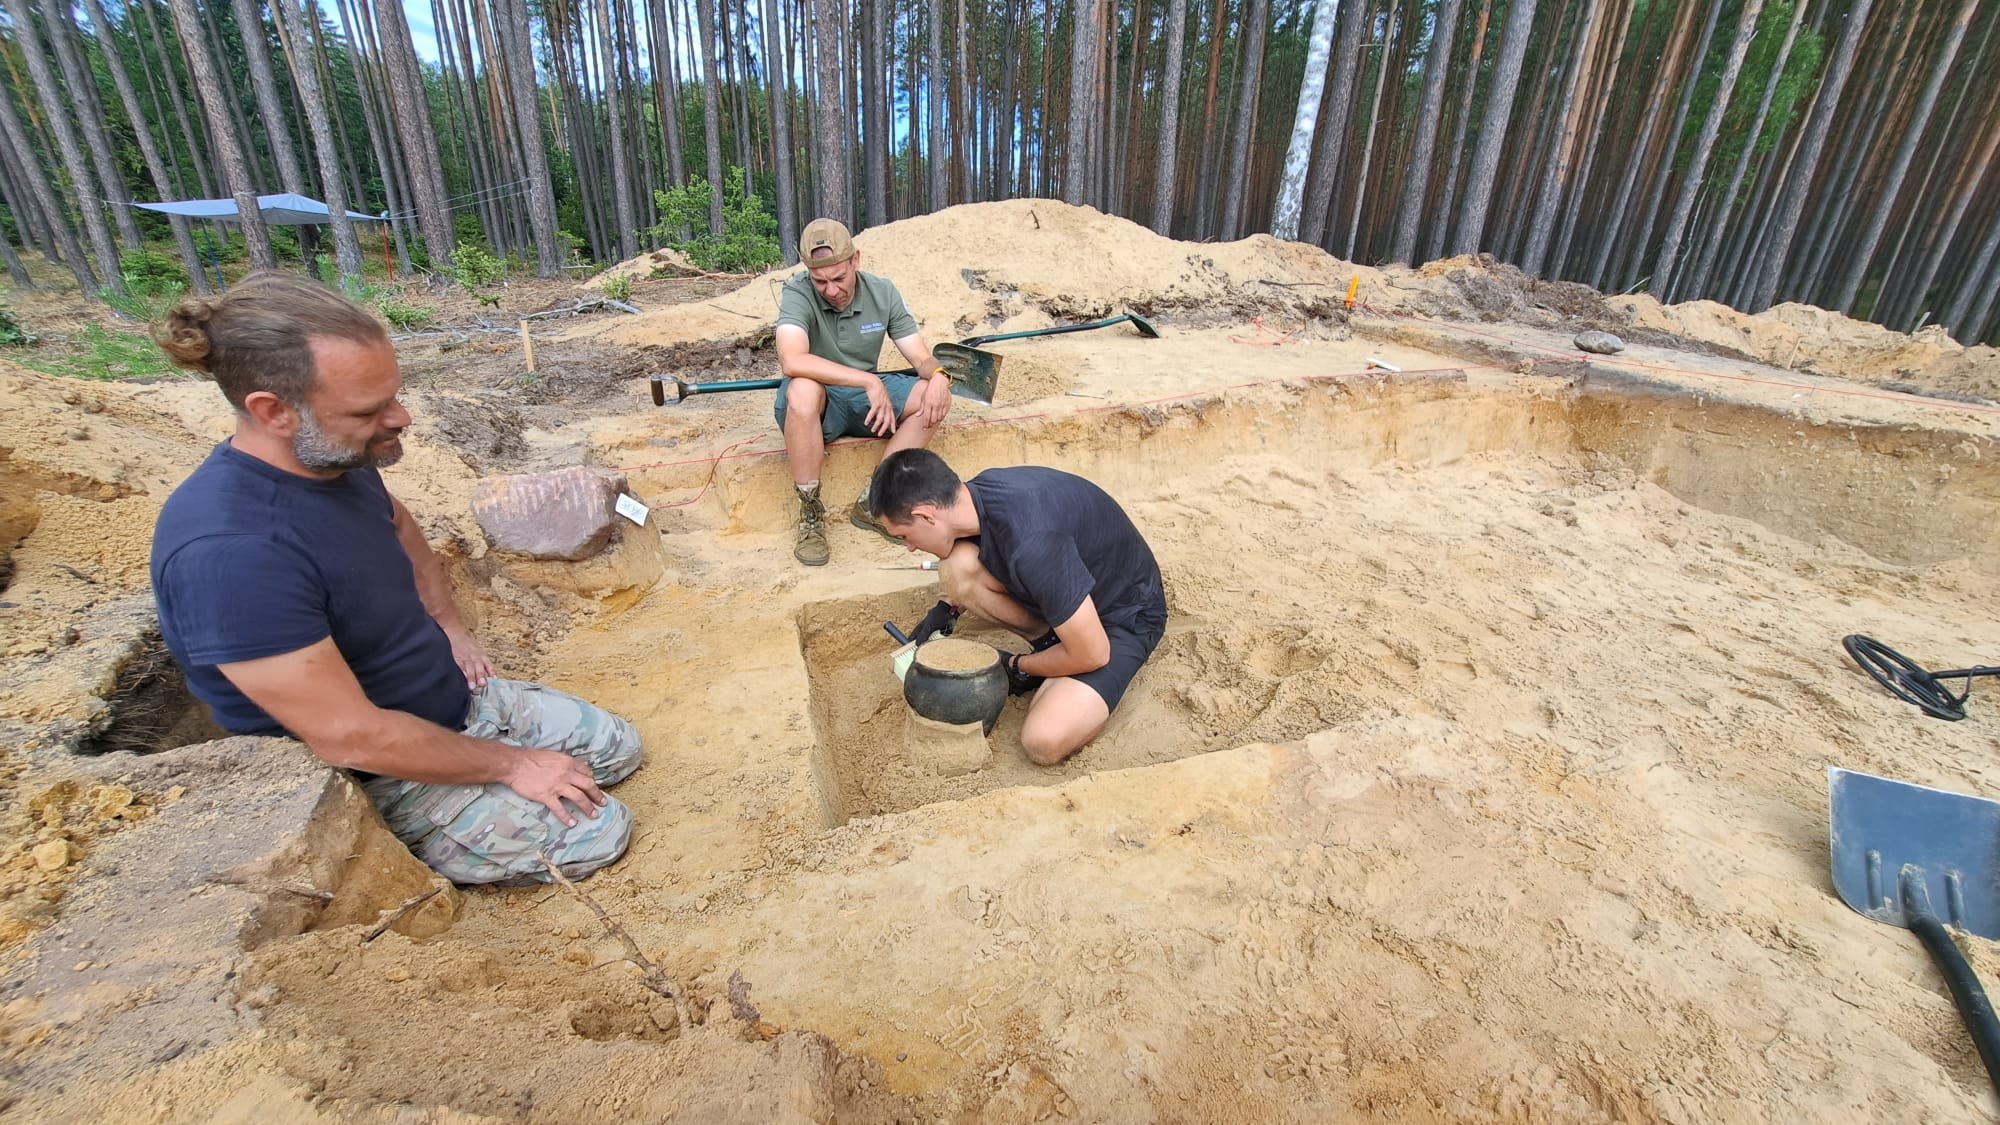 Ancient jewelry and gothic burials were discovered in a Polish forest